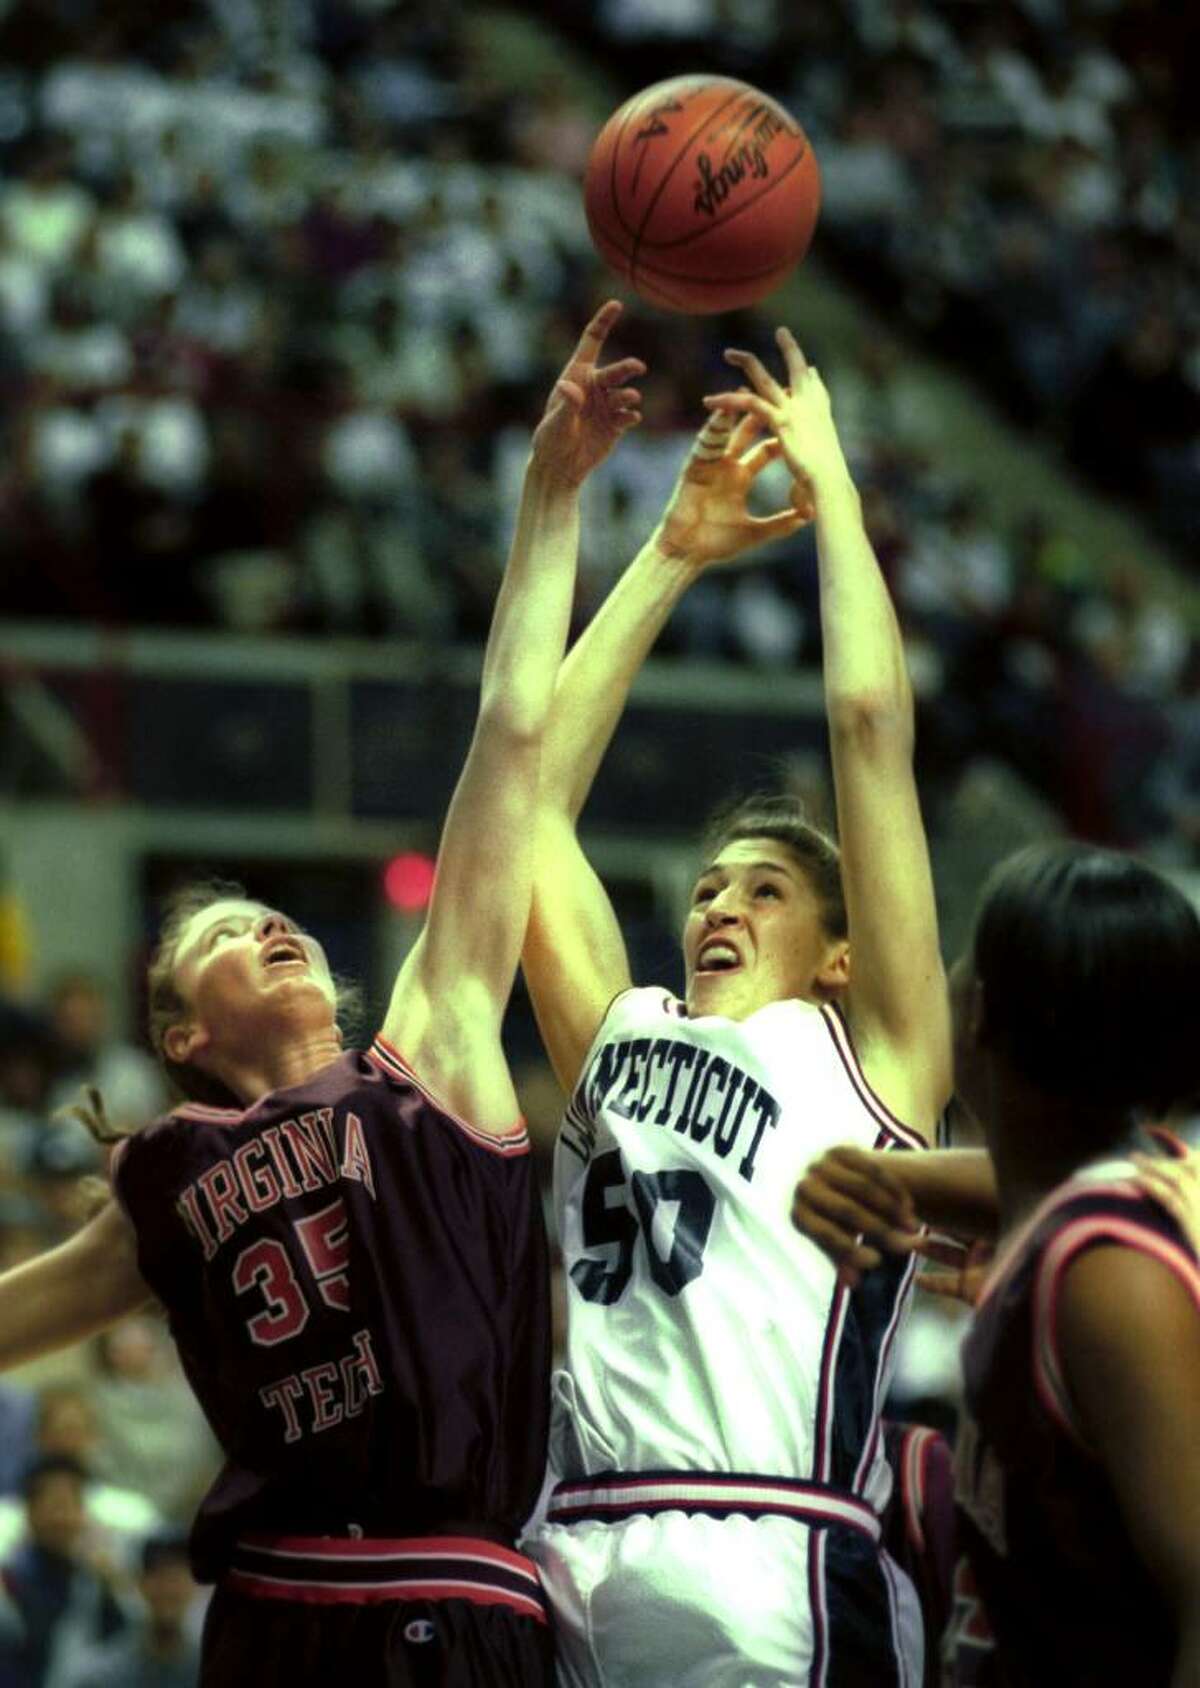 University of Connecticut basketball player Rebecca Lobo in action against Virginia Tech on March 18th, 1995.